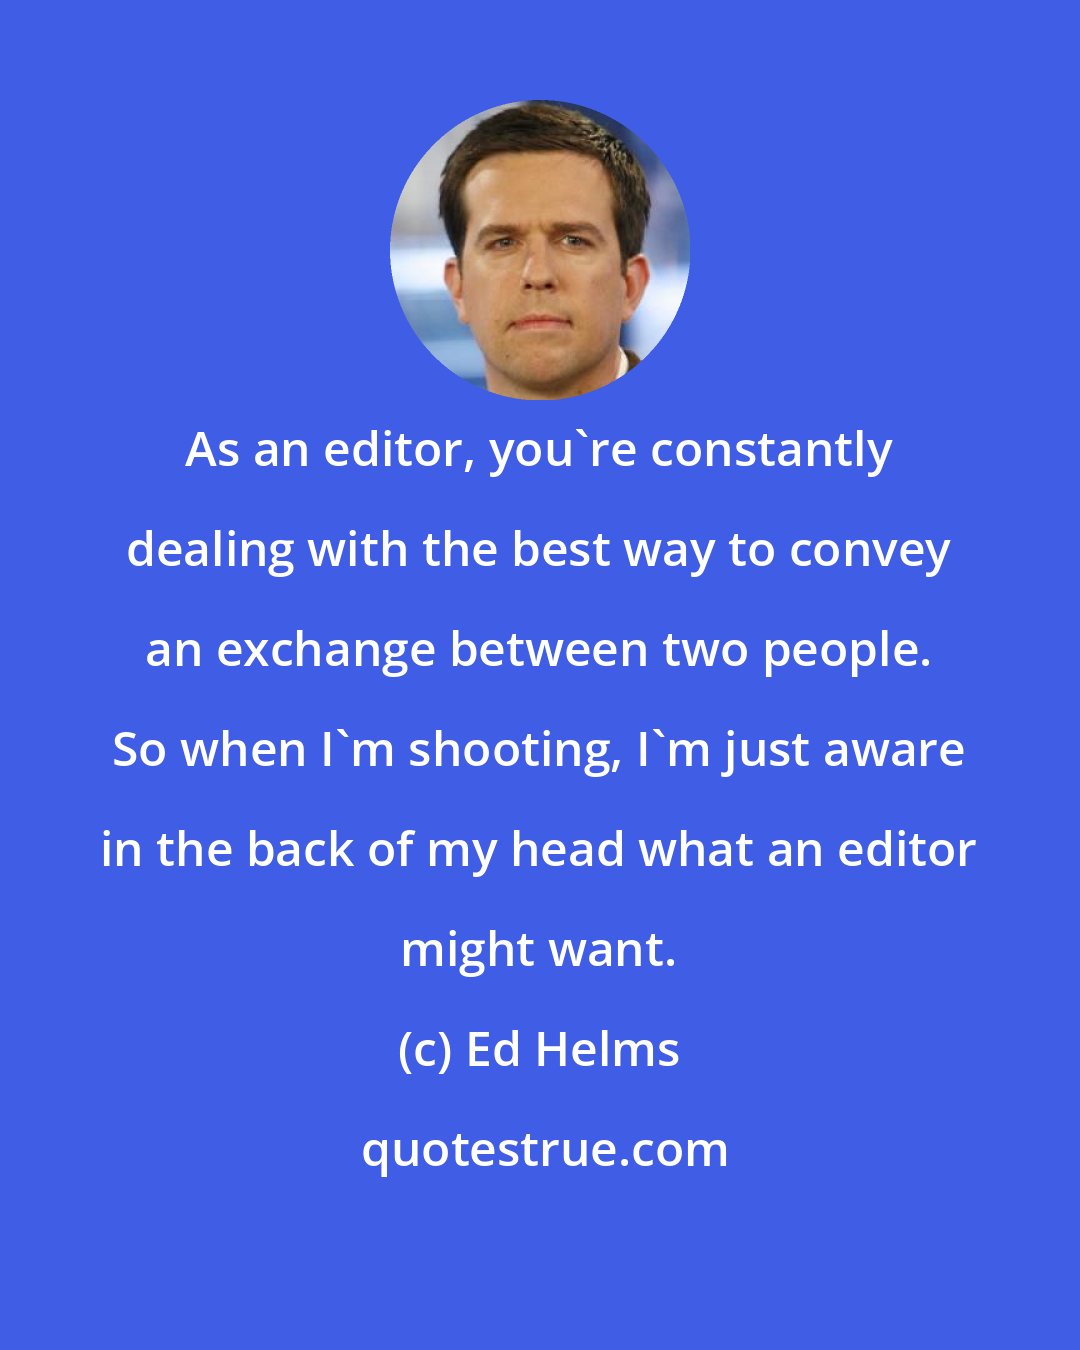 Ed Helms: As an editor, you're constantly dealing with the best way to convey an exchange between two people. So when I'm shooting, I'm just aware in the back of my head what an editor might want.